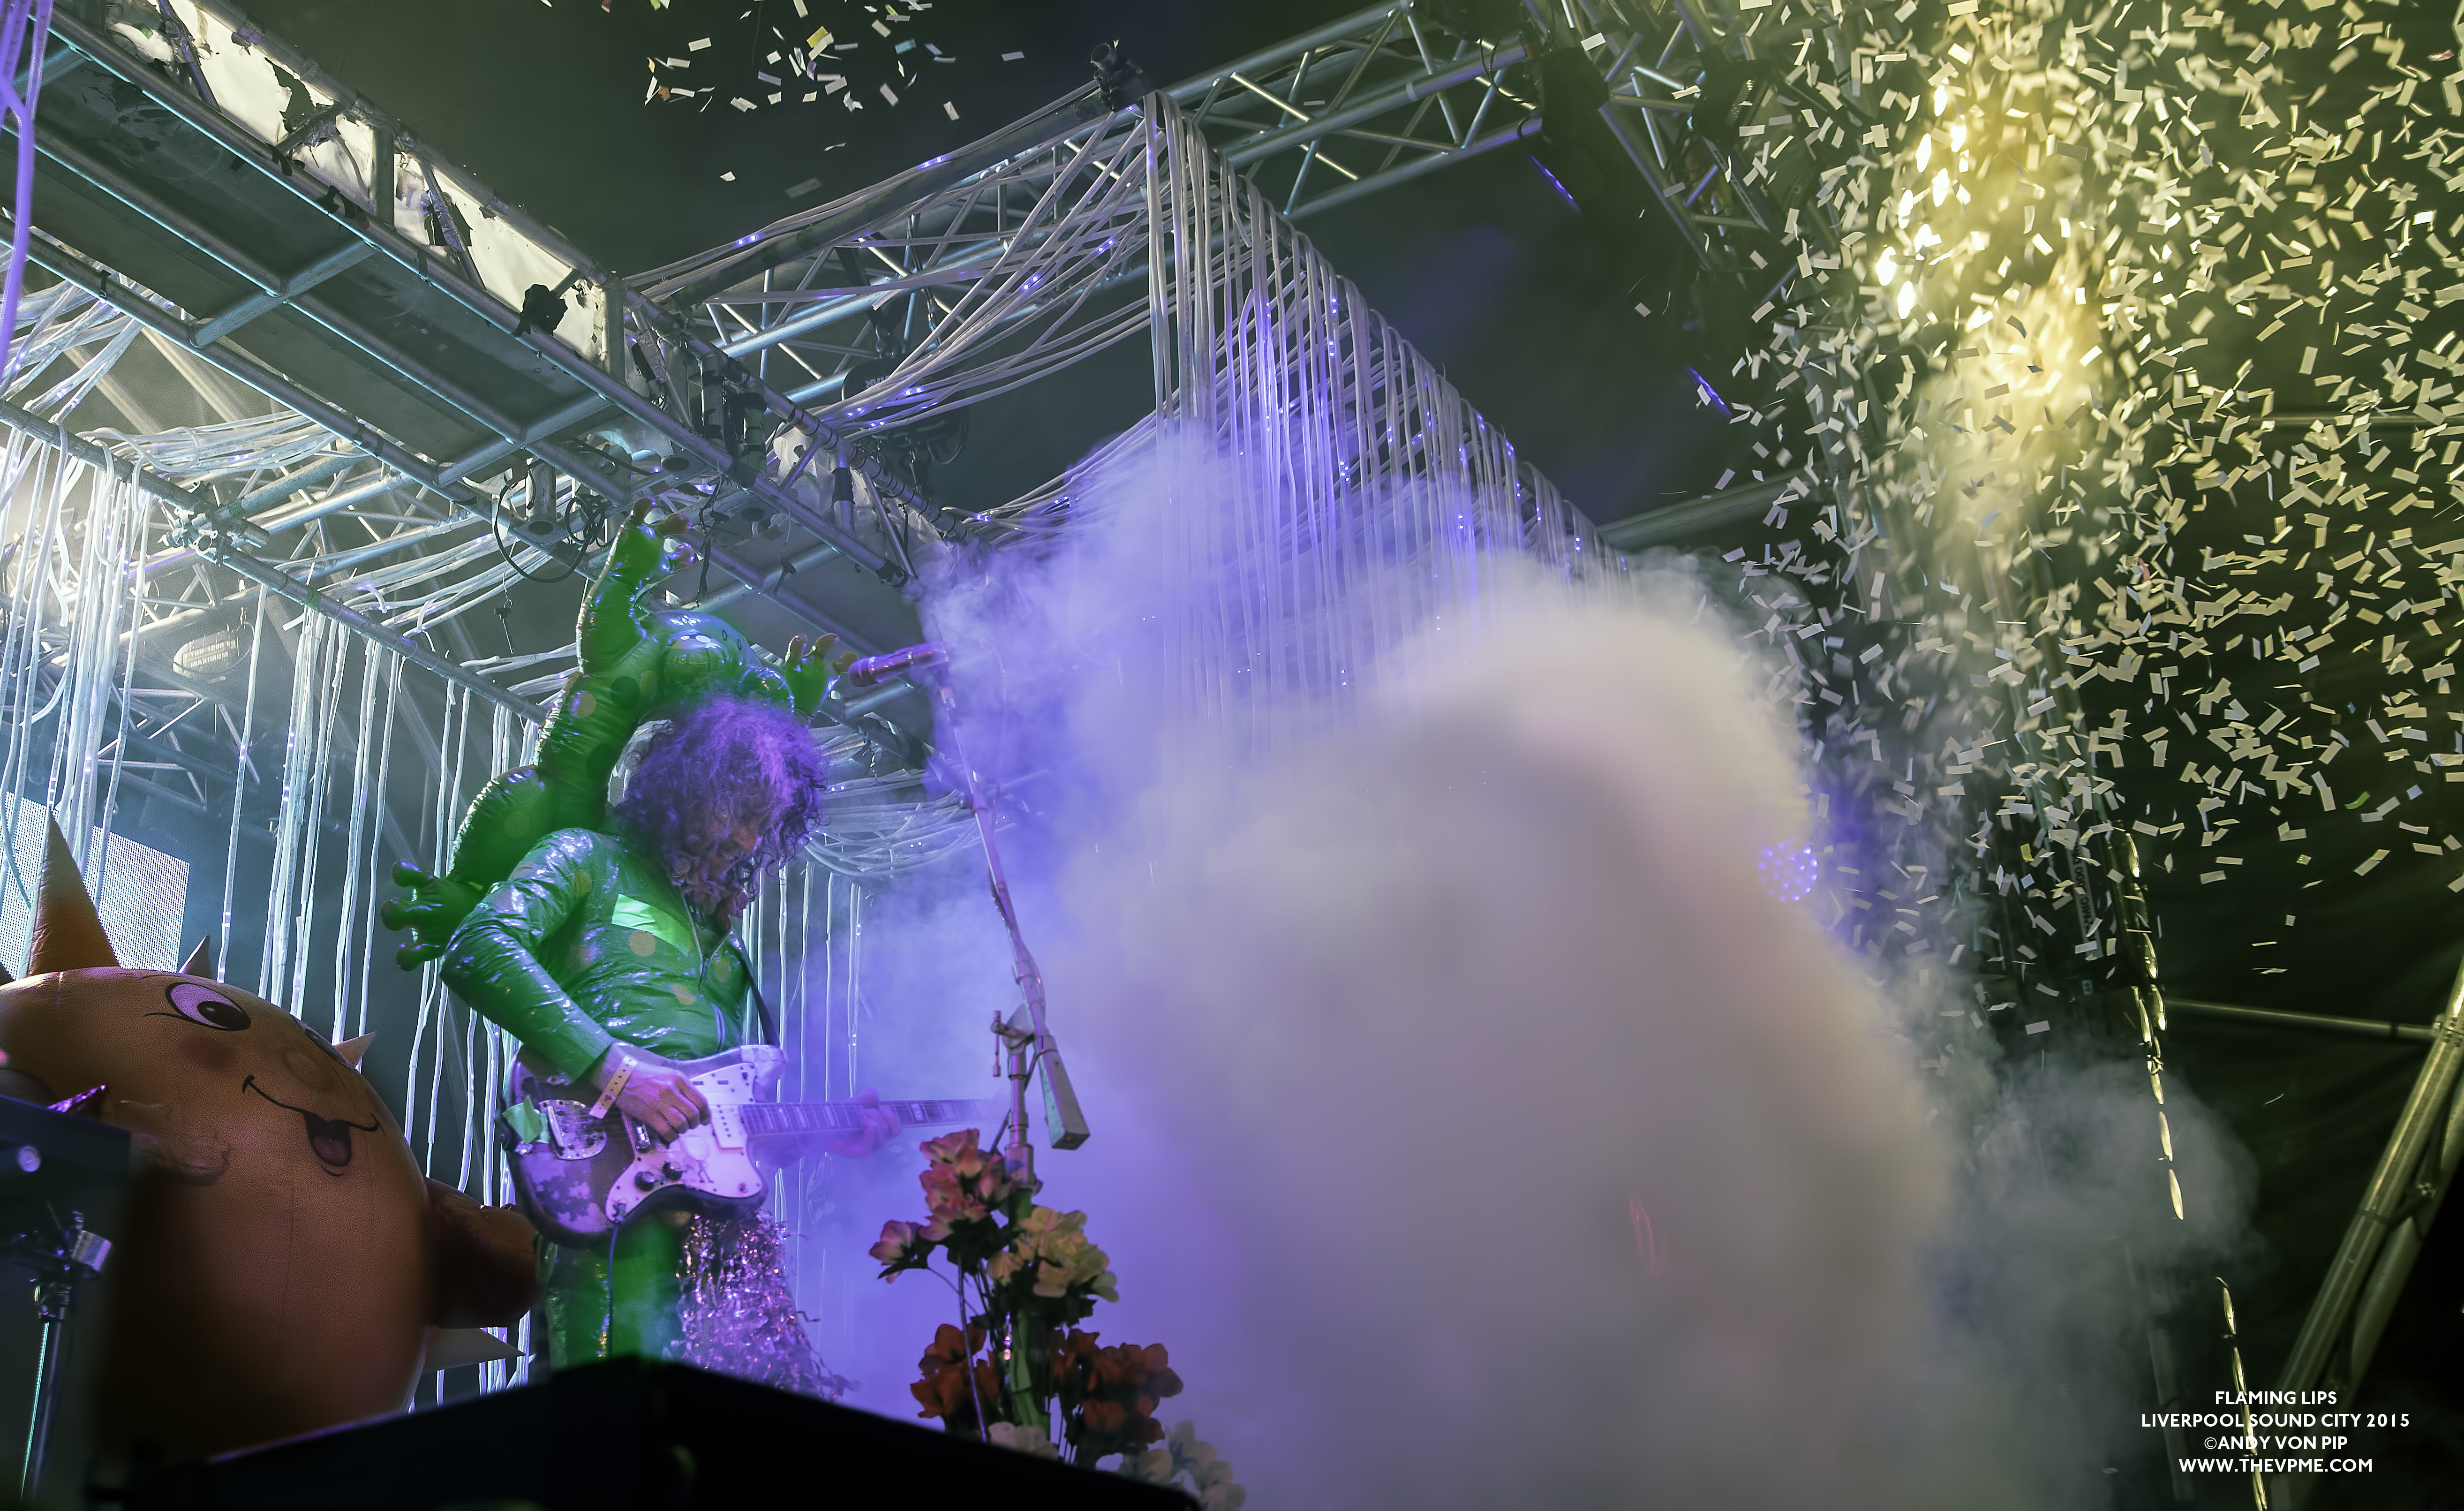 FLAMING LIPS LIVERPOOL SOUND CITY 2015